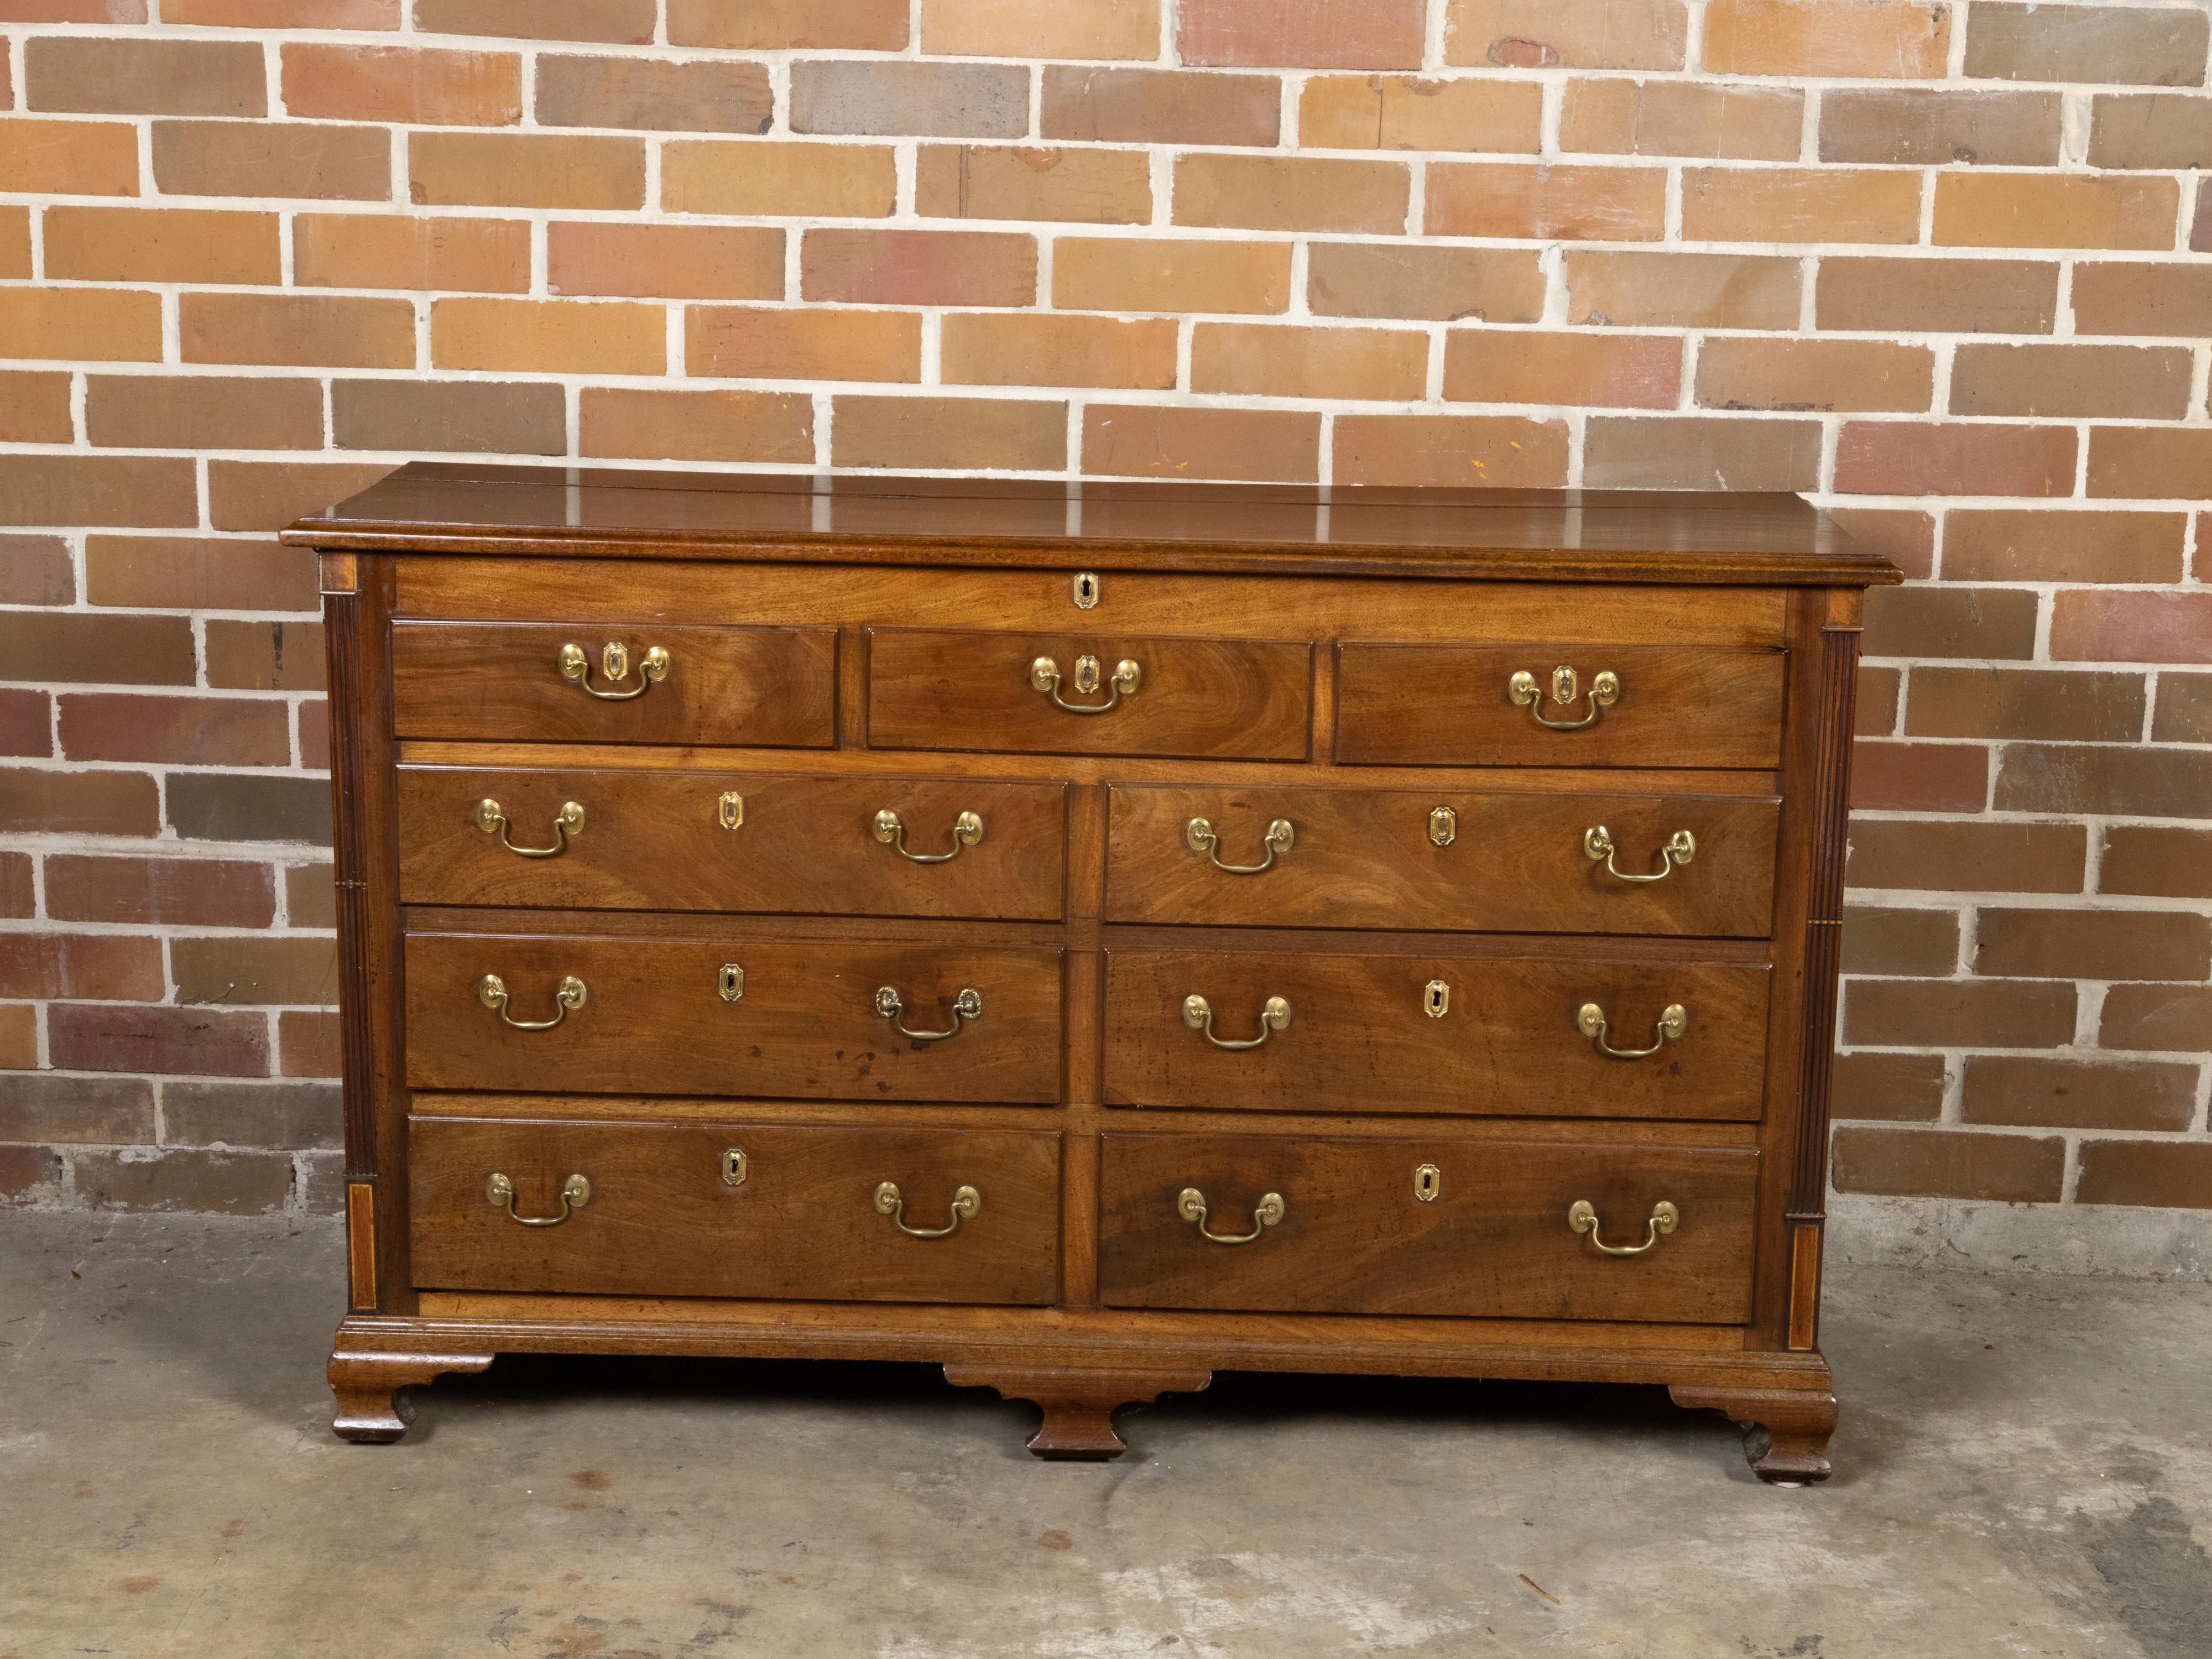 An English walnut flip top sideboard from the 19th century with faux drawers, four lower ones and reeded side posts. Created in England during the 19th century, this walnut sideboard is full of surprises! The piece features a rectangular flip top